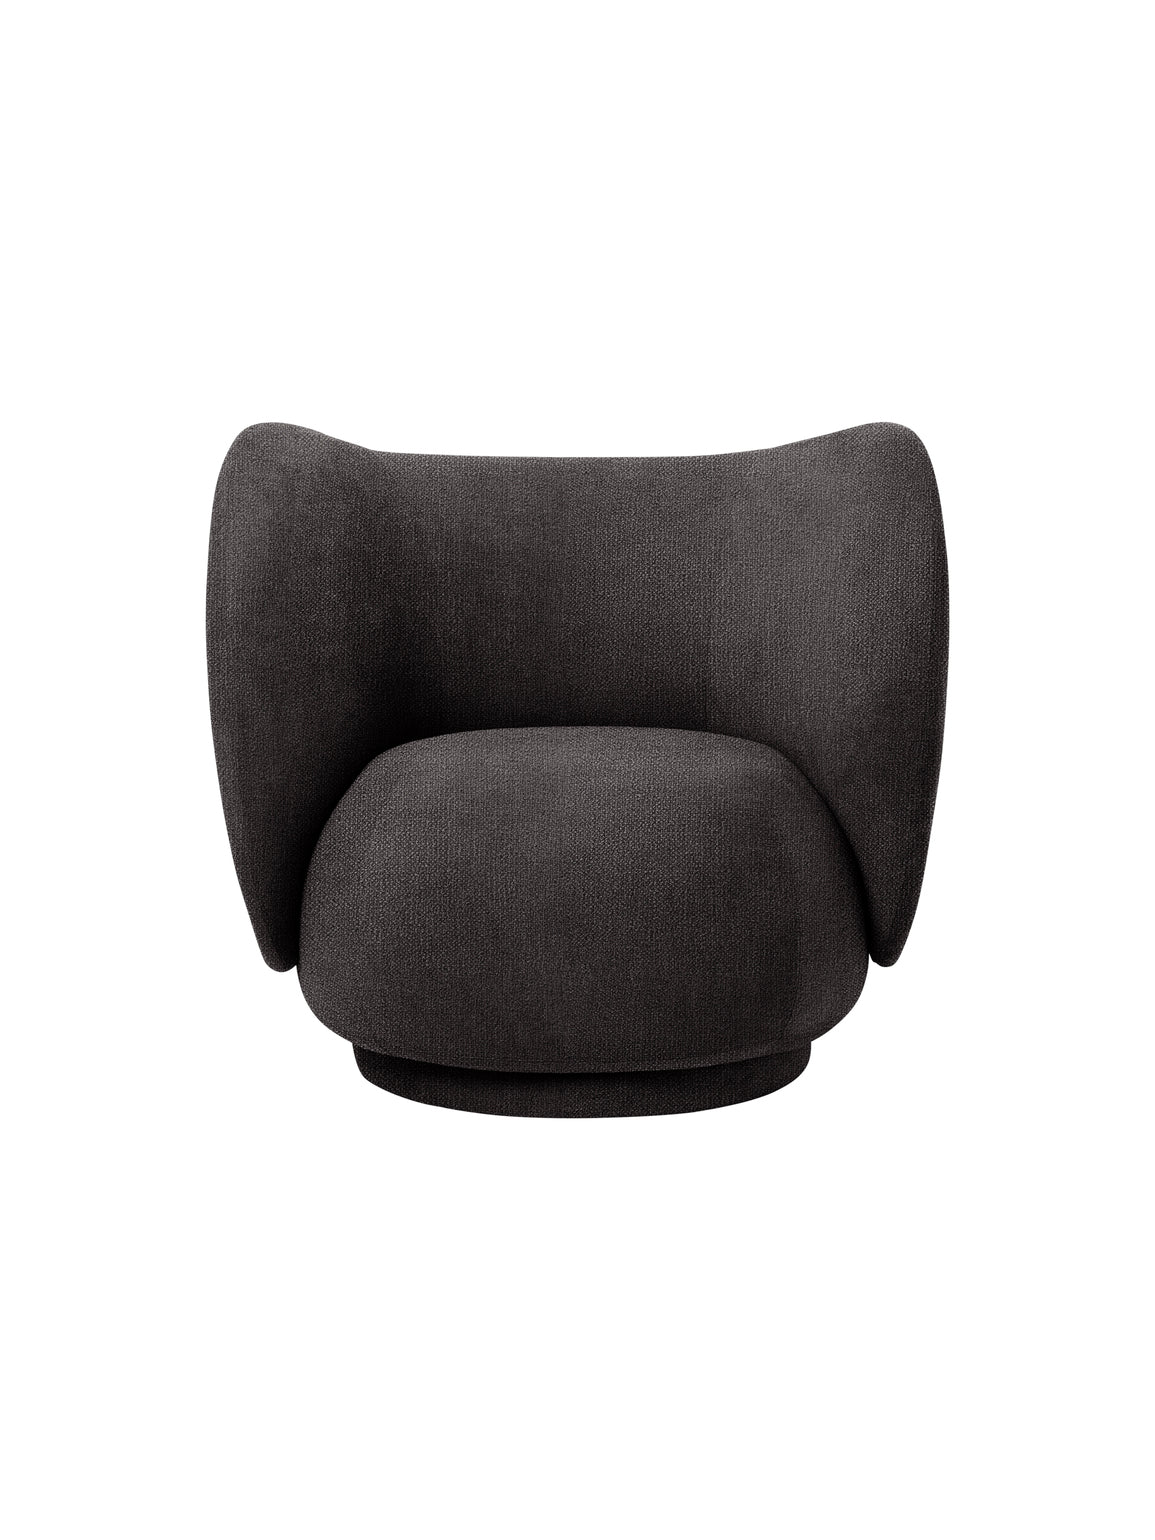 Rico Lounge Chair with Swivel Base | Armchair | in Bouclé fabric - Lifestory - ferm Living